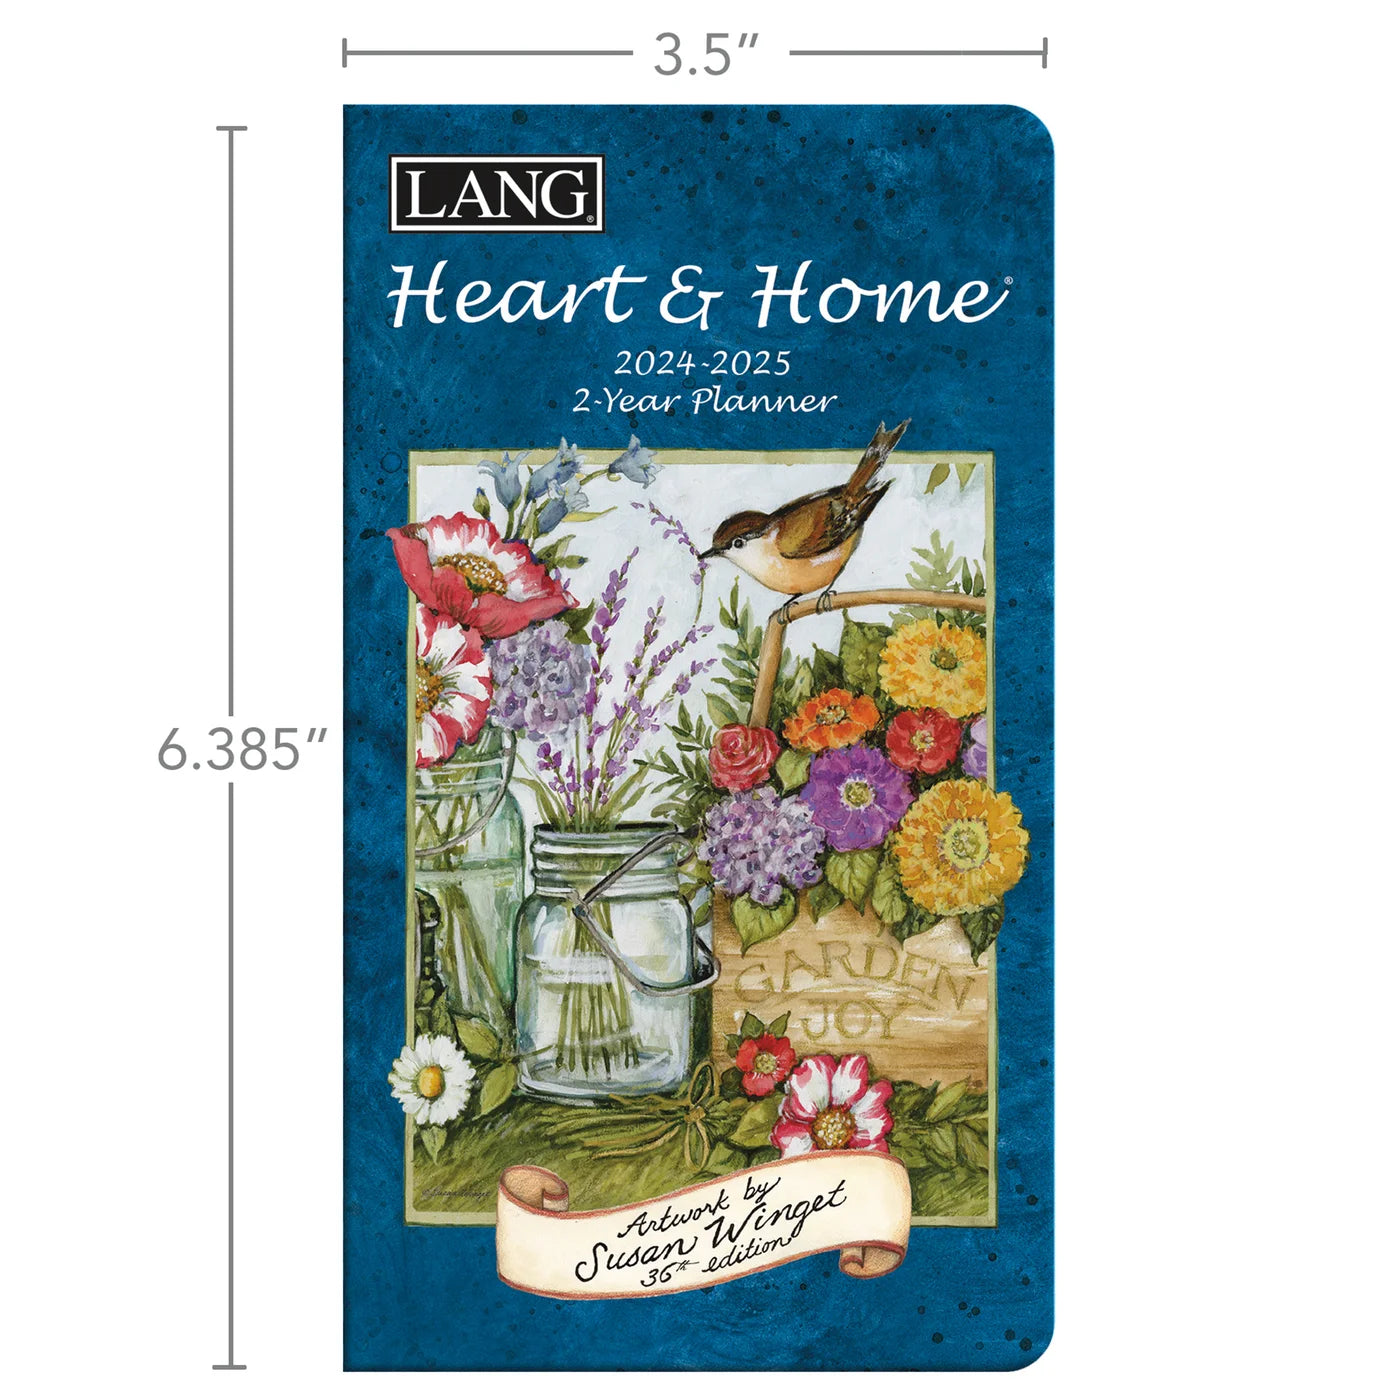 2024-2025 LANG Heart & Home - 2 Year Pocket Diary/Planner